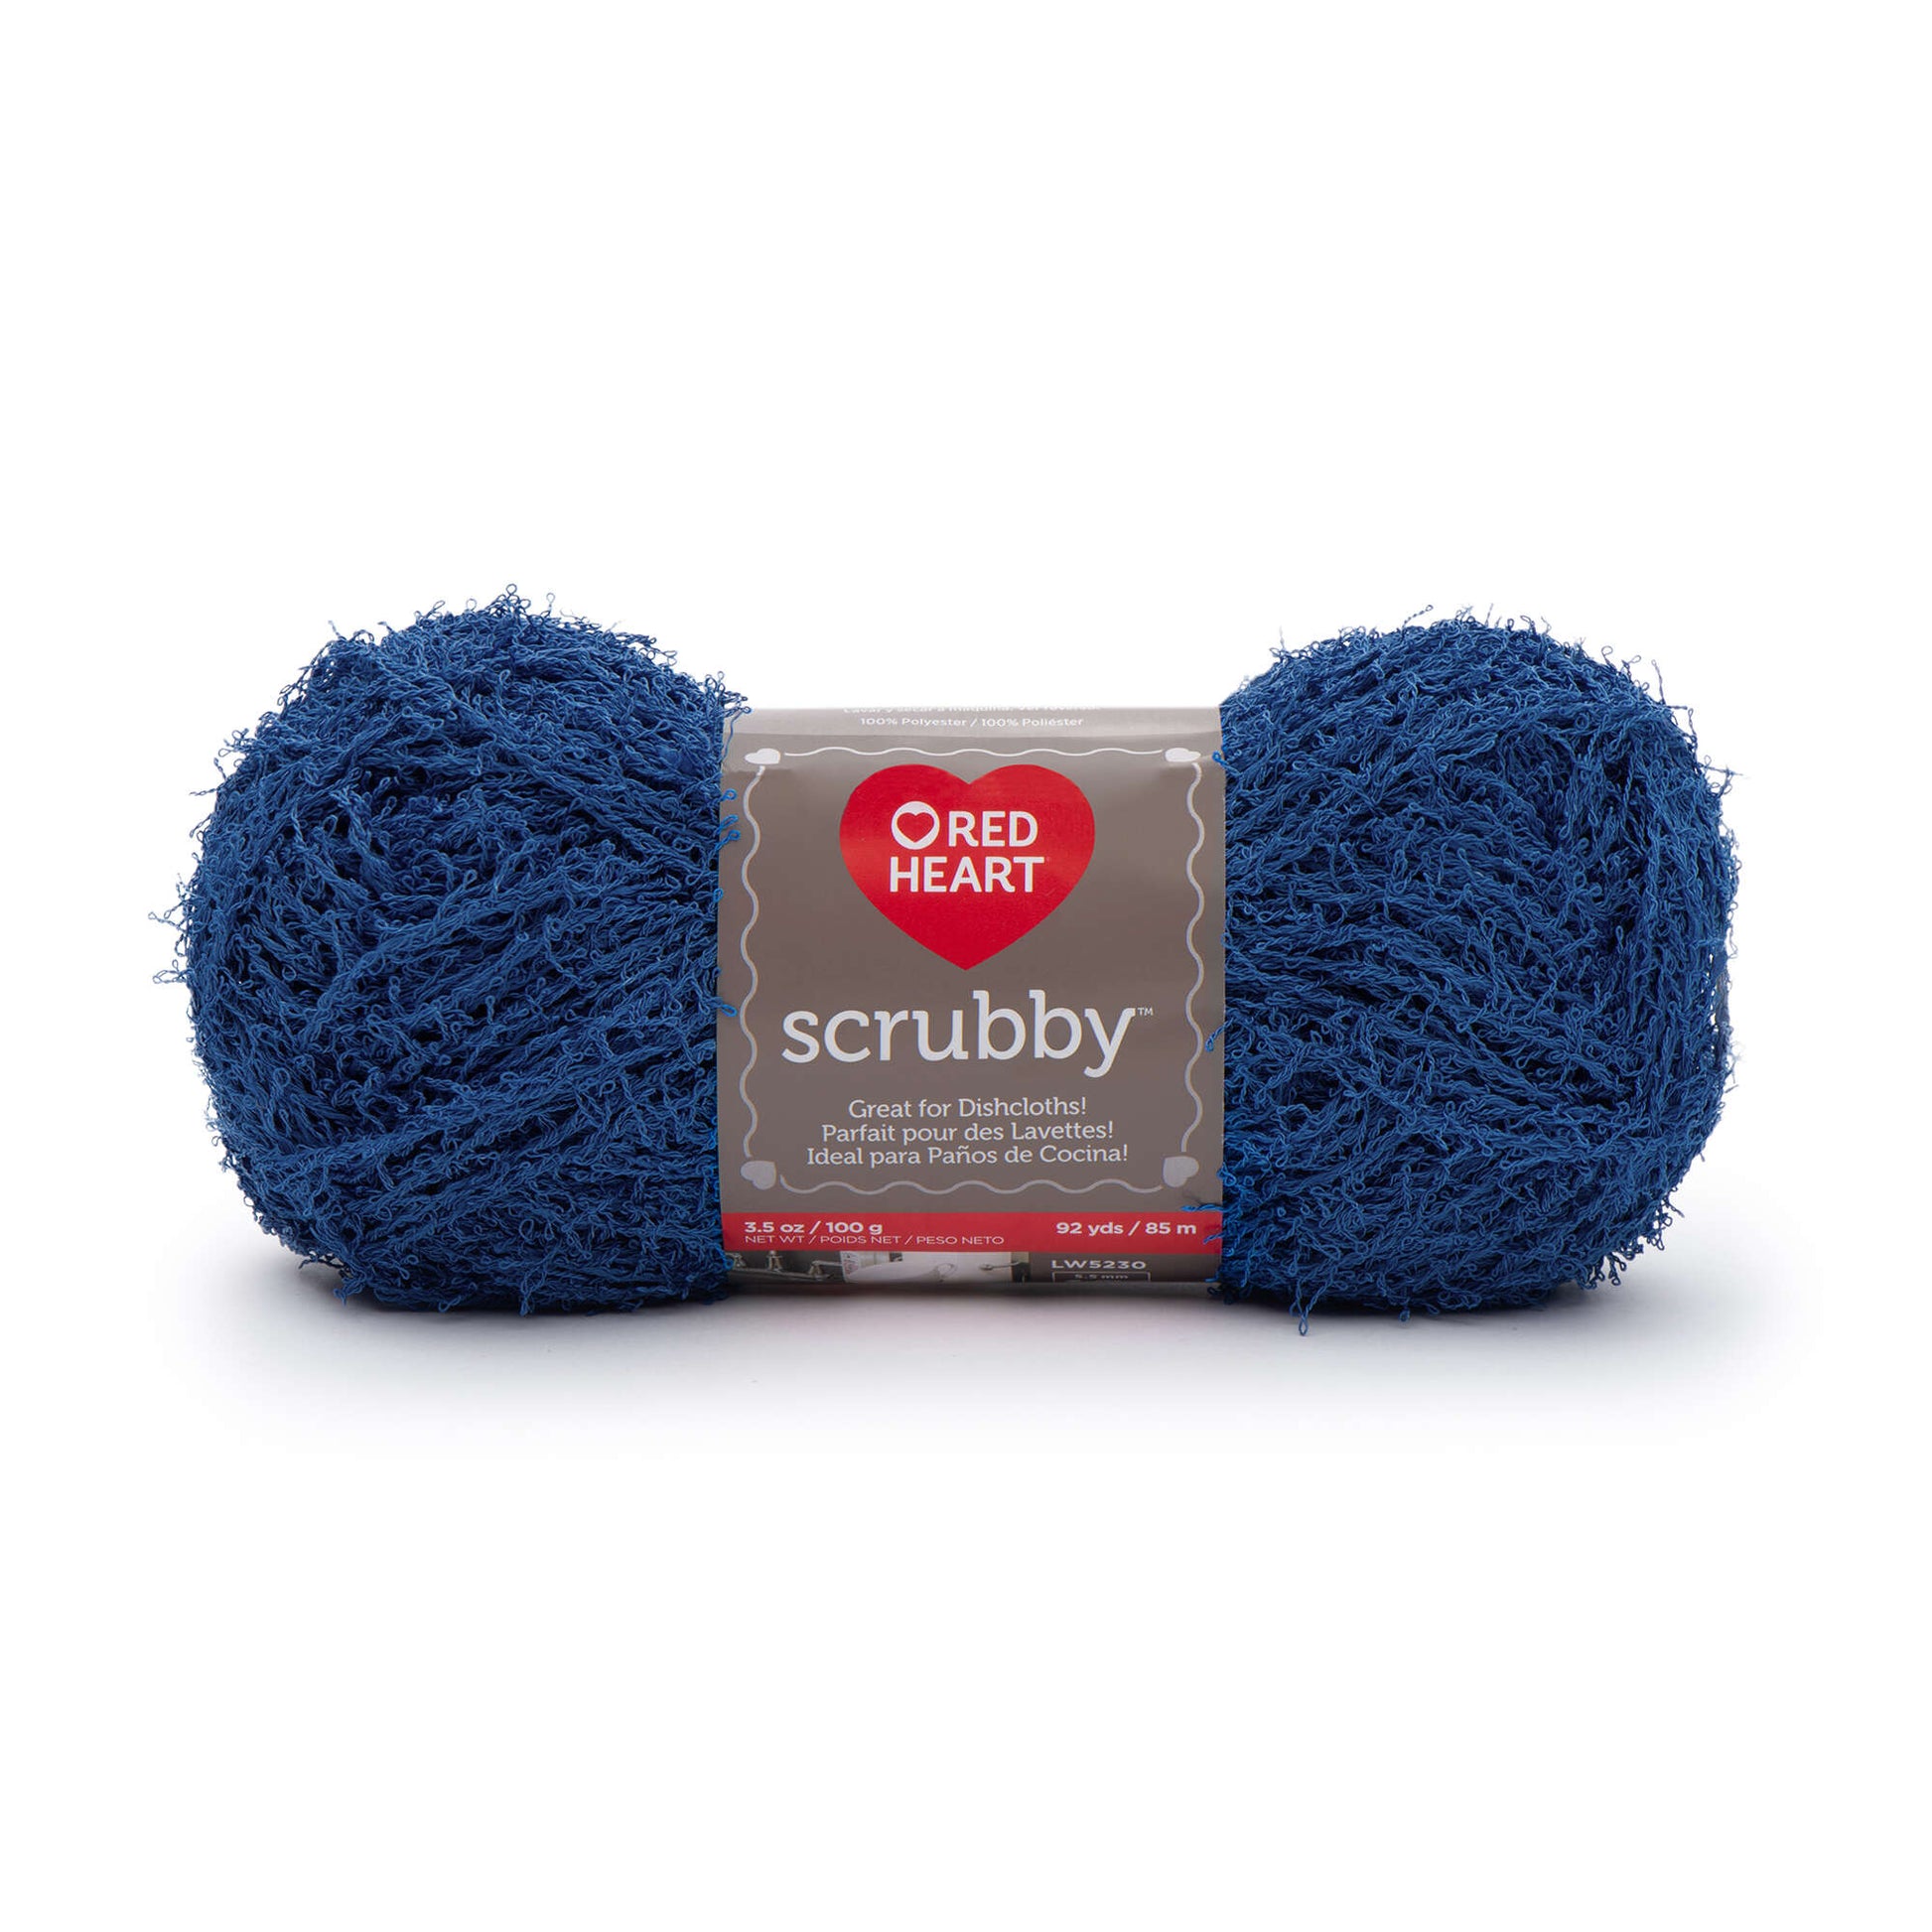 Red Heart Scrubby Yarn-Ocean, 1 count - Pay Less Super Markets